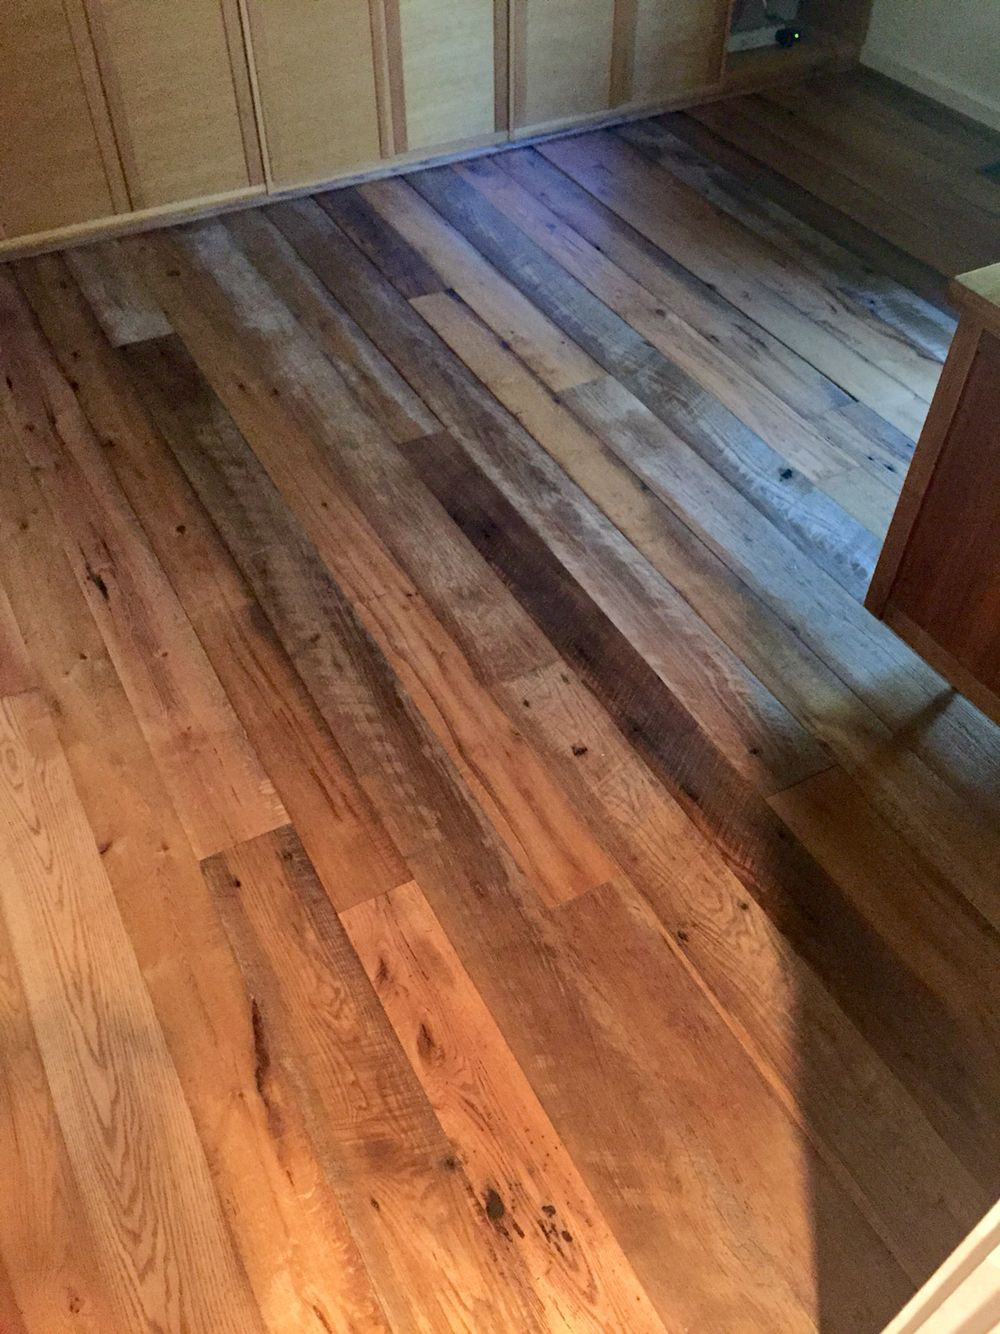 28 Famous 5 Red Oak Hardwood Flooring 2023 free download 5 red oak hardwood flooring of reclaimed white and red oak mix finished with bona dts sealer and throughout reclaimed white and red oak mix finished with bona dts sealer and 2coats of bona t